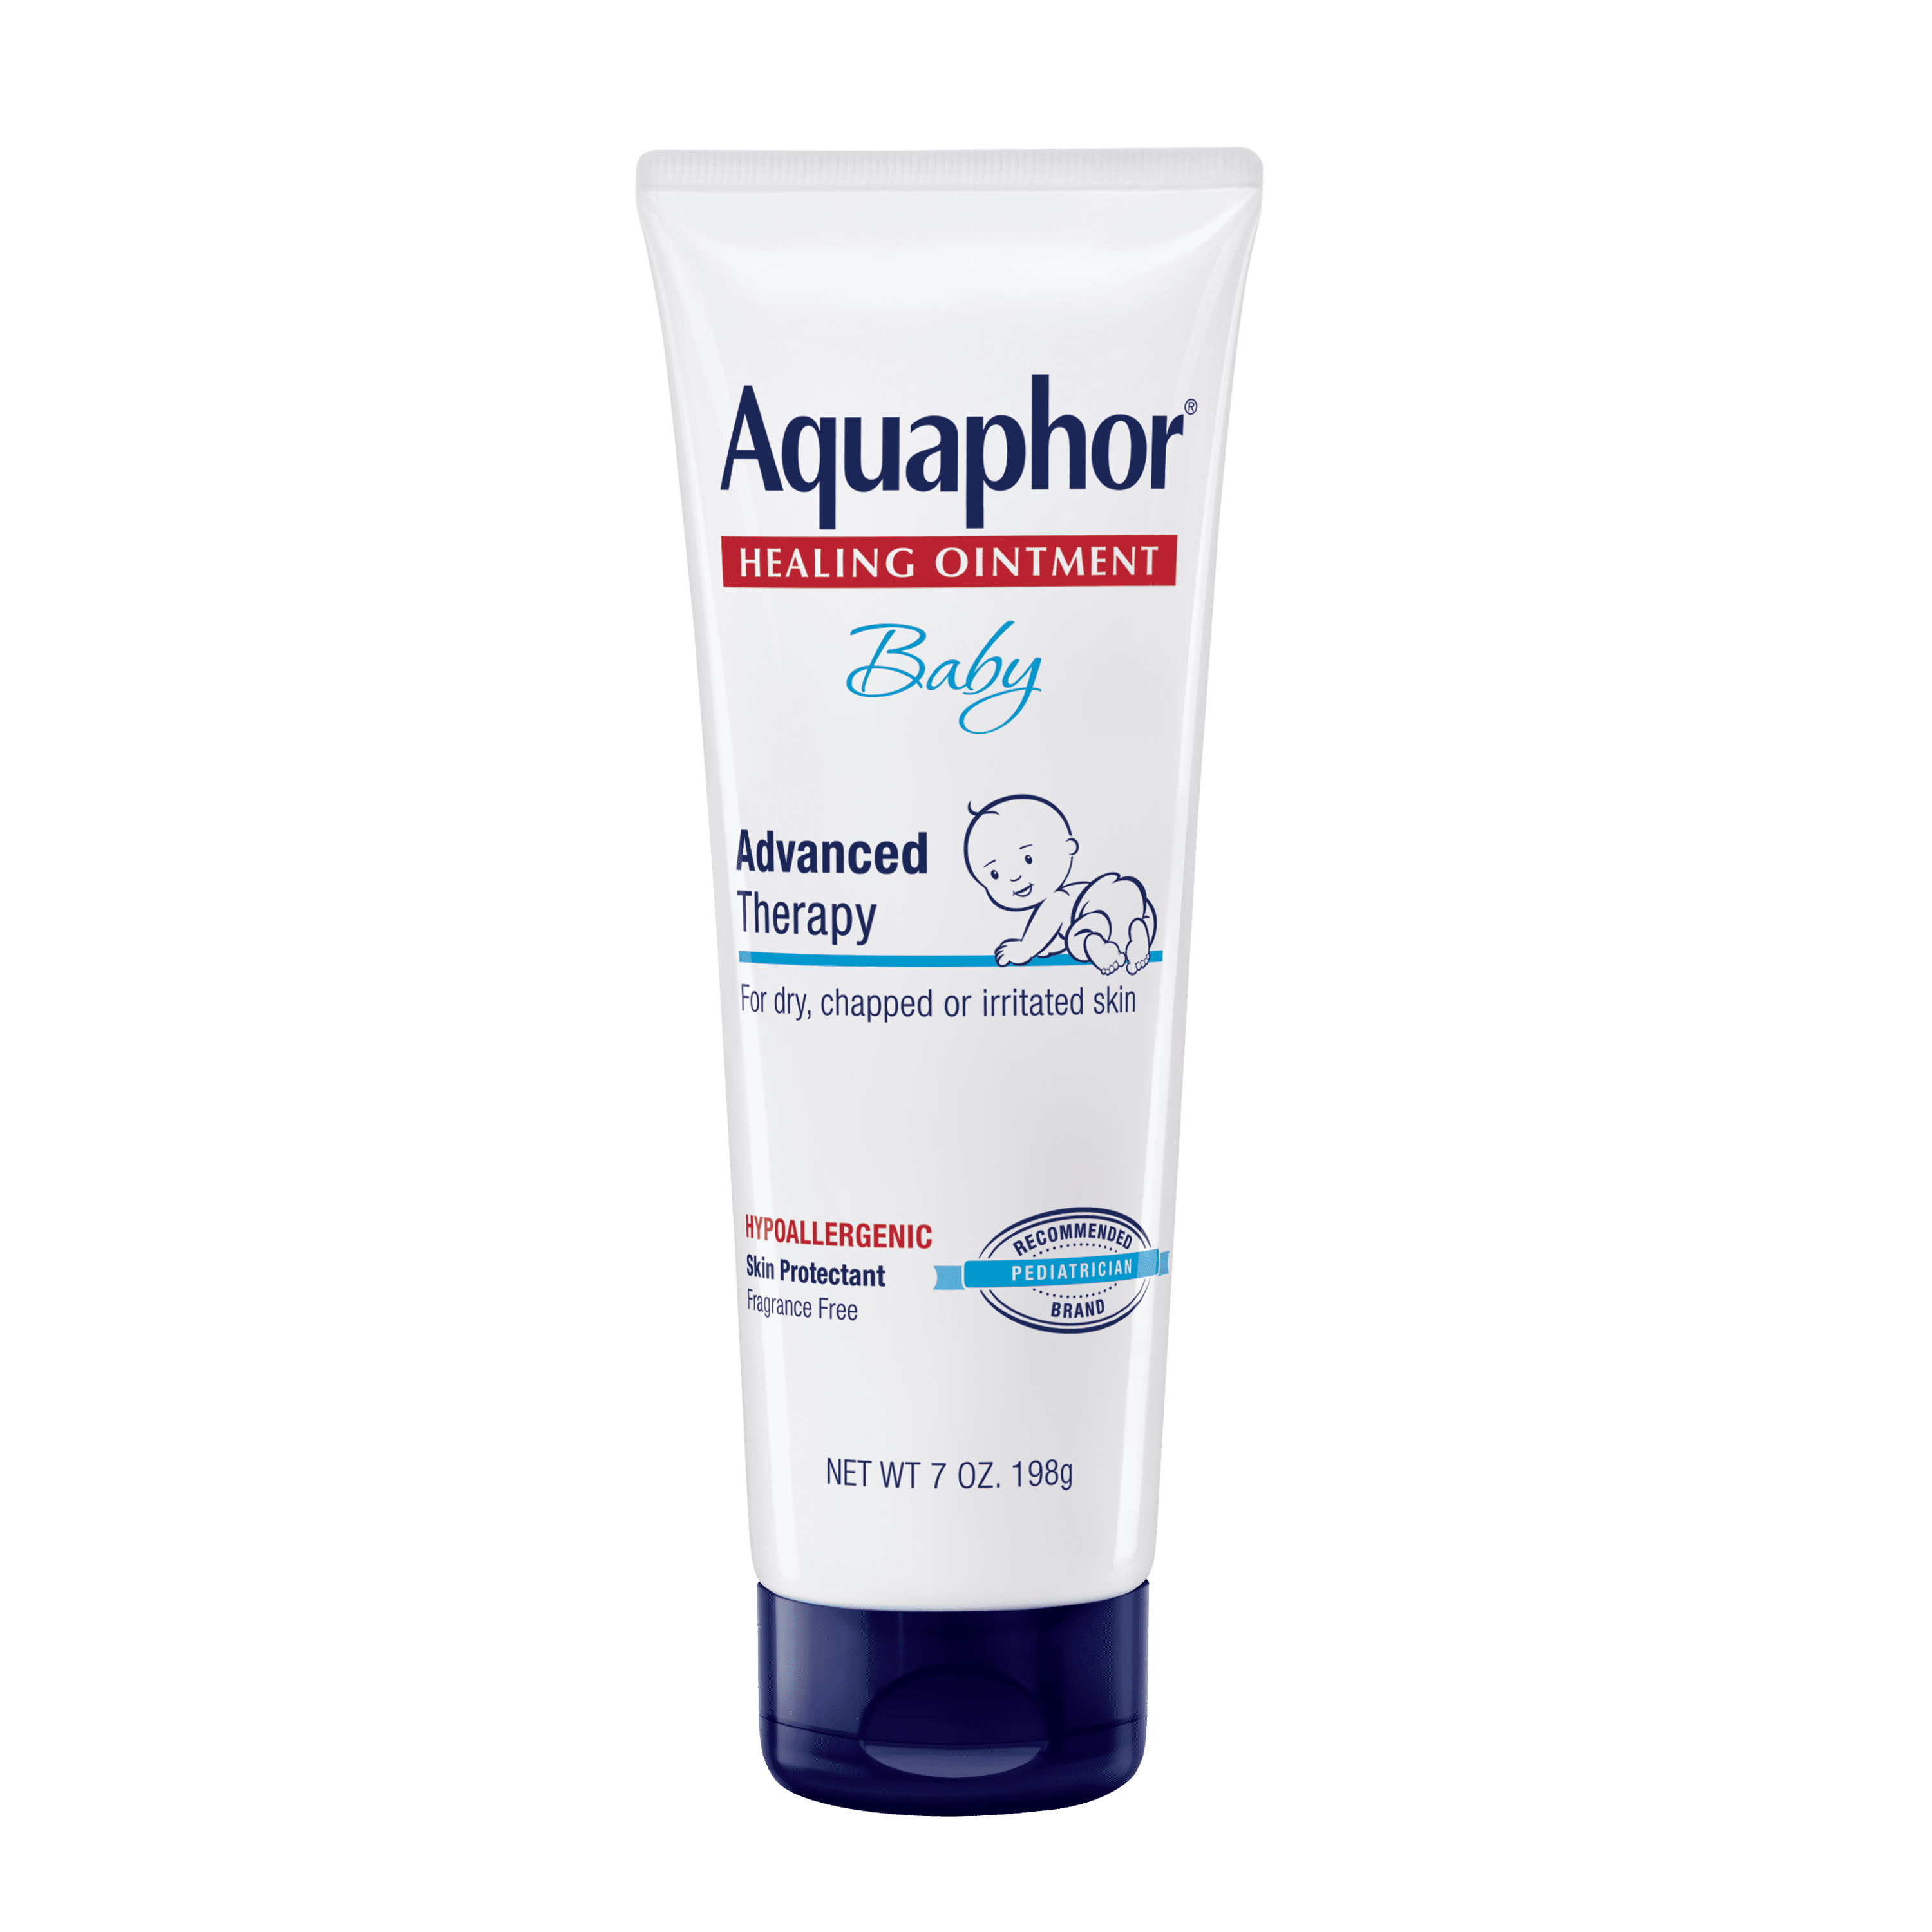 Aquaphor Healing Ointment Advanced Therapy Skin Protectant, Dry Skin Body  Moisturizer, 0.35 Oz Tube, 2 Count (Pack of 1)